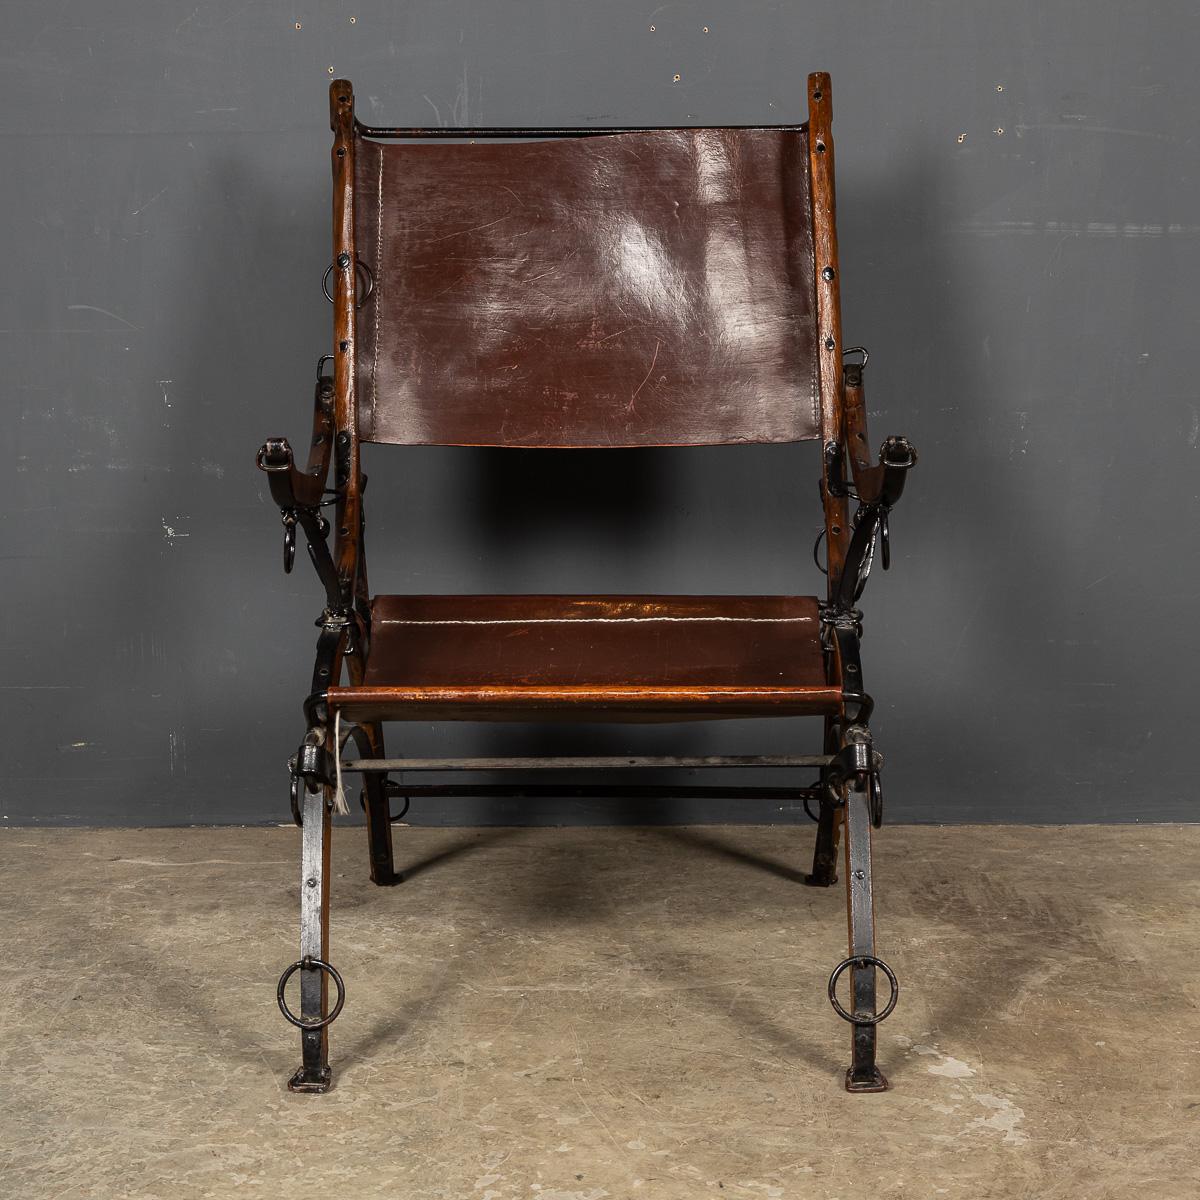 Early 20th Century Antique 20th Century Leather Horses Harness Chair c.1900